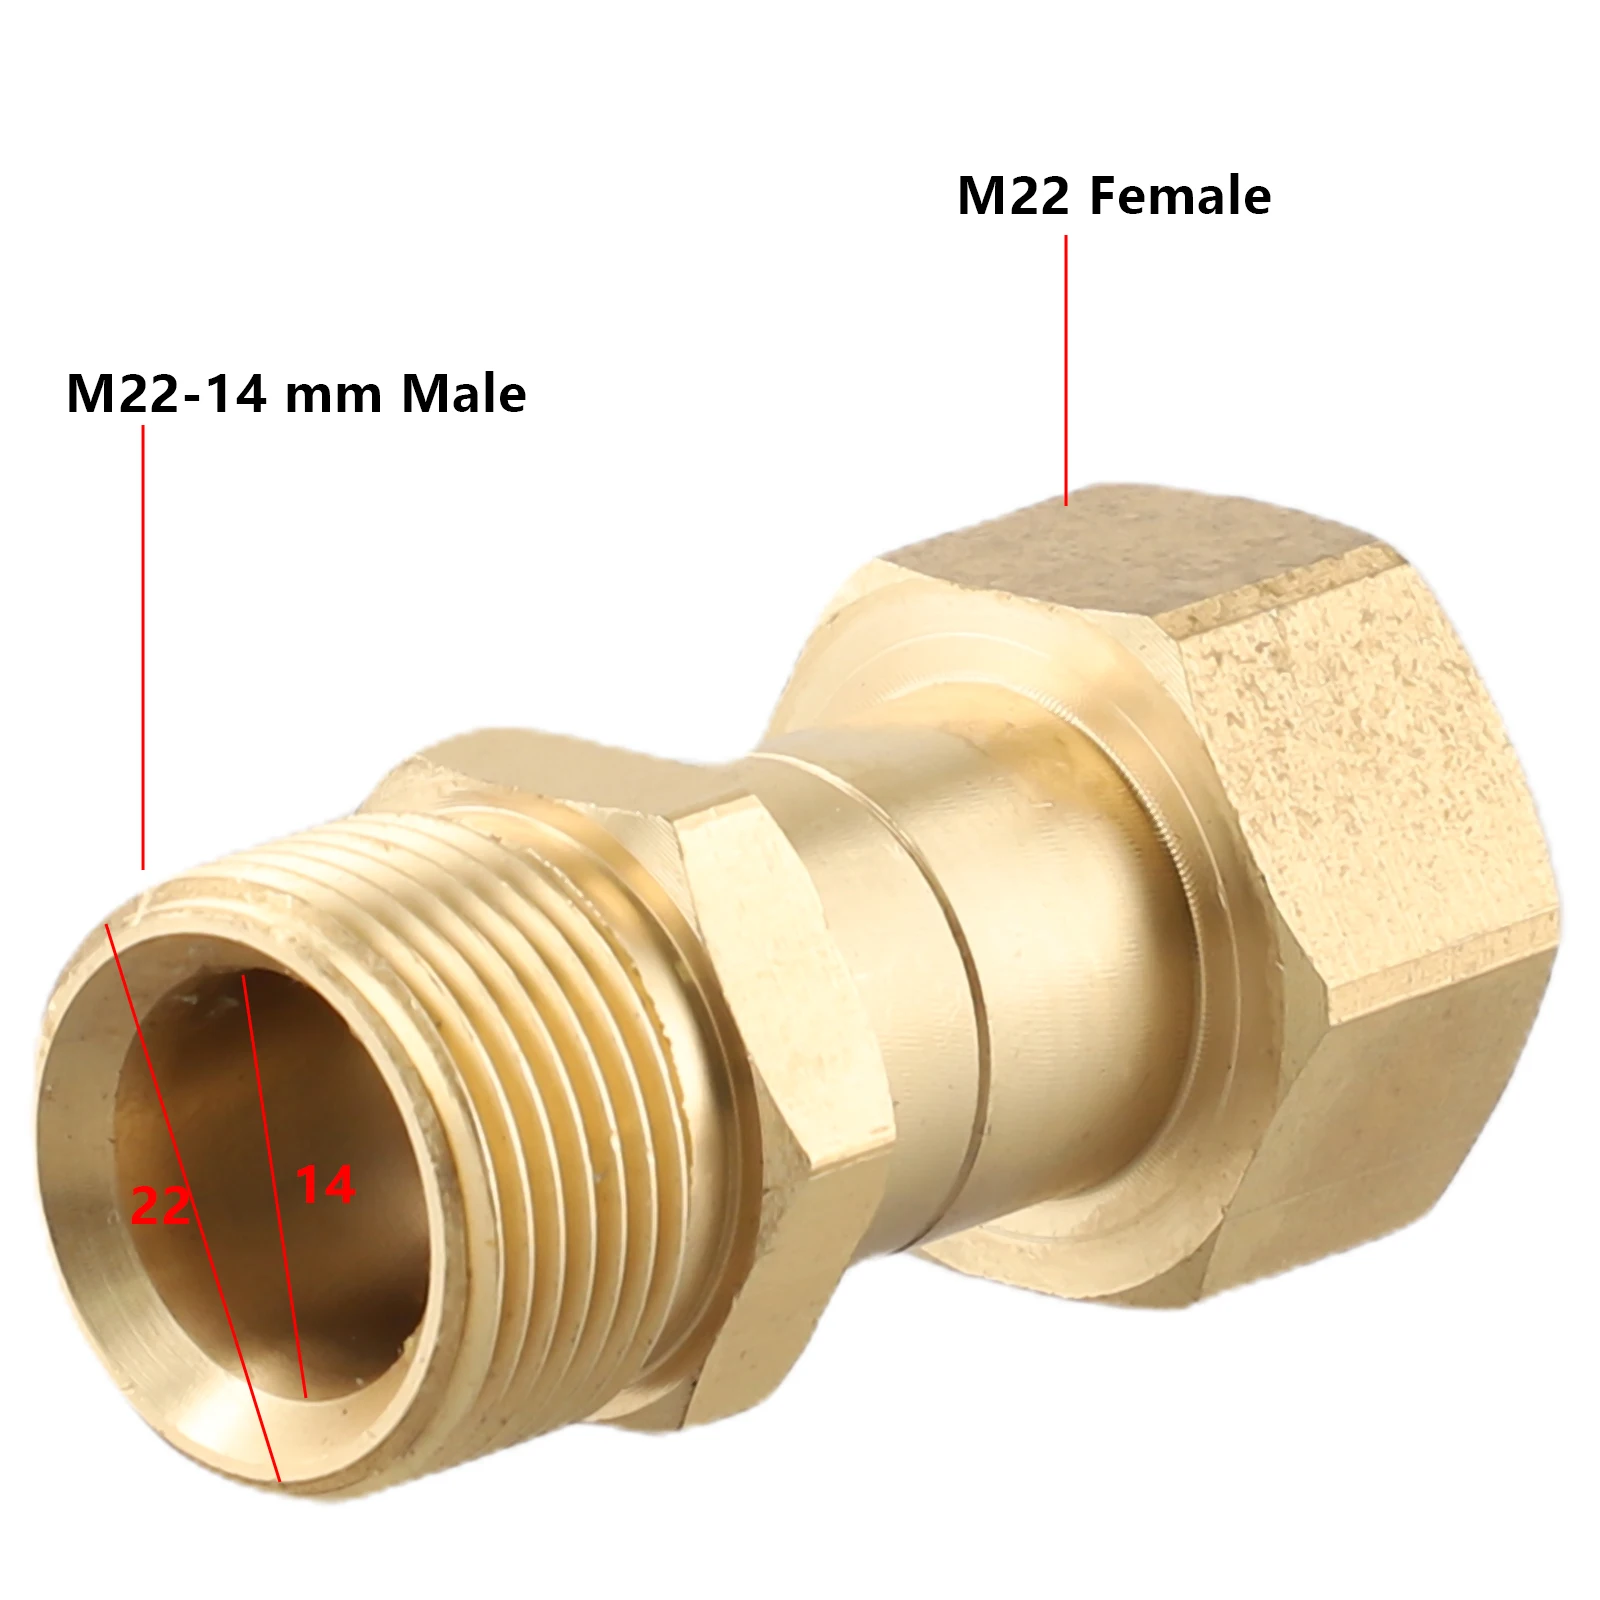 

Brass Swivel Joint Outdoor Equipment Hose Fitting Corrosion Resistance Twisting Pressure Washer Garden Water Connector Parts